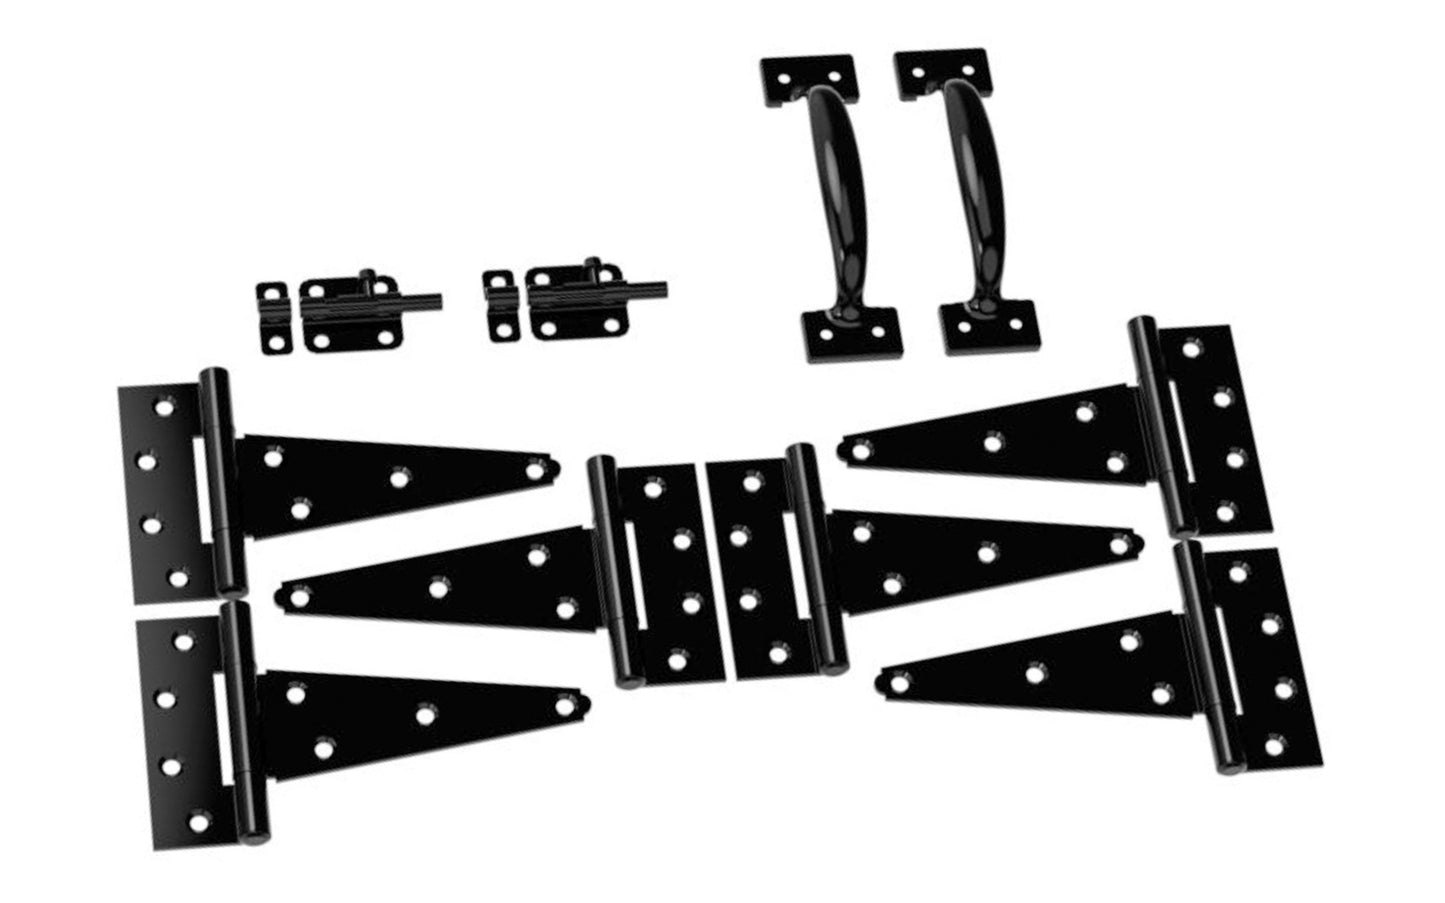 This Black Finish Shed Kit is used for replacing existing hardware on two shed doors. Black finish for style & durability. Mounting hardware included for easy installation. Kit includes (6) T-hinges, (2) Barrel Bolts, (2) Pulls & (1) Swivel Staple Safety Hasp. National Hardware Catalog Model N166-006. 886780029451